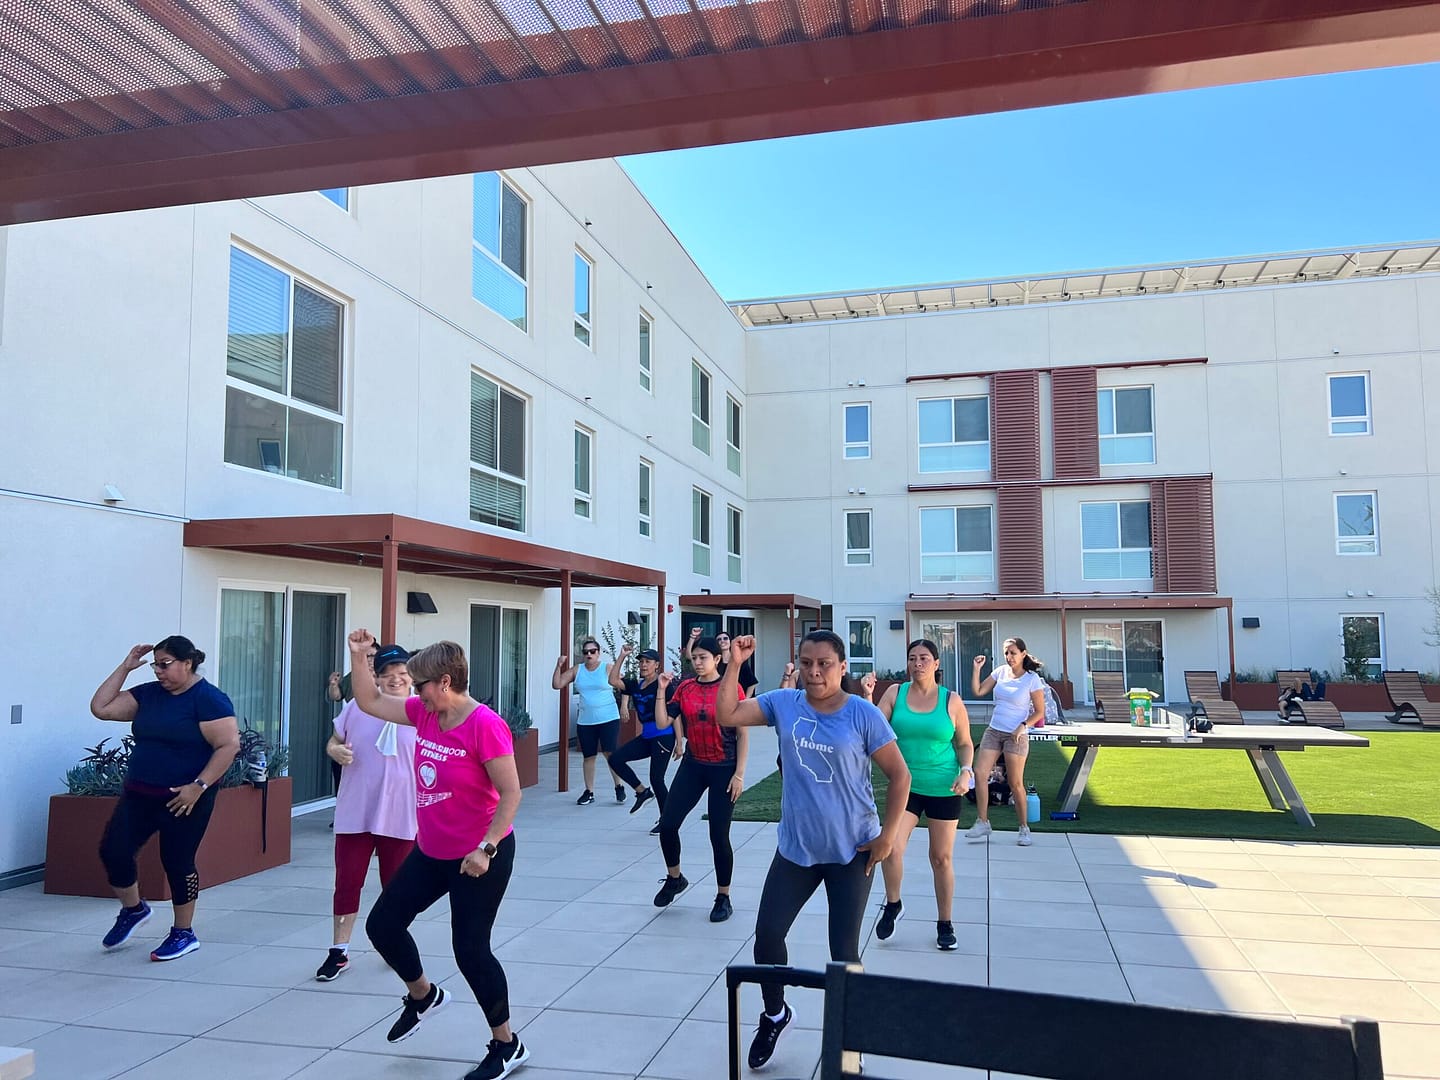 Latin Dance Fitness Program: A Powerful Example Of Residents Leading Change In Their Own Neighborhoods